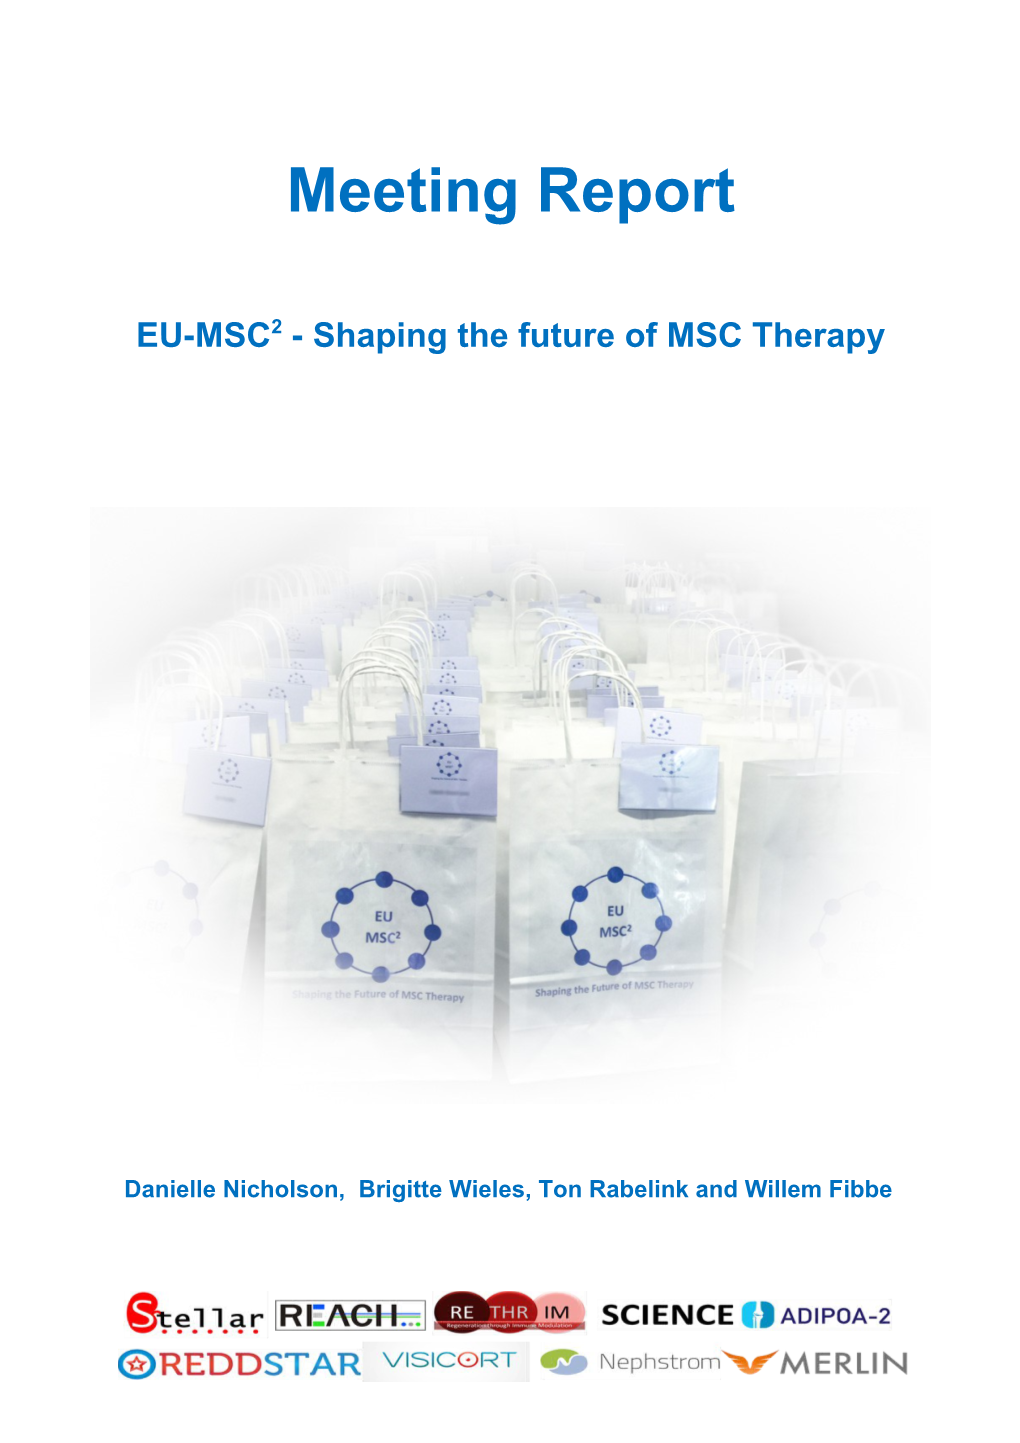 EU-MSC2- Shaping the Future of MSC Therapy